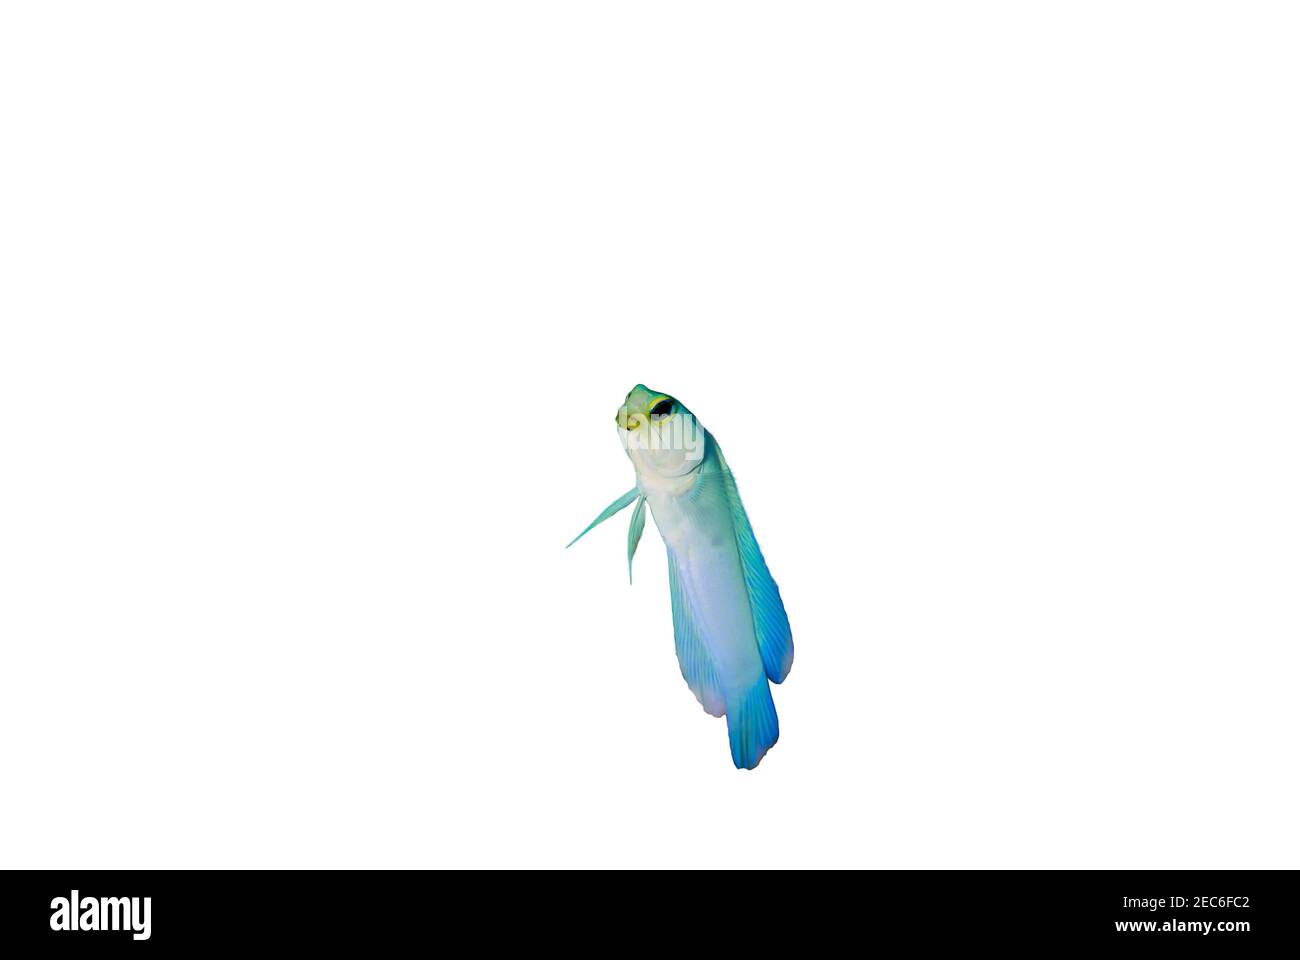 Yellowhead Jawfish isolated on a white background with copy space Stock Photo